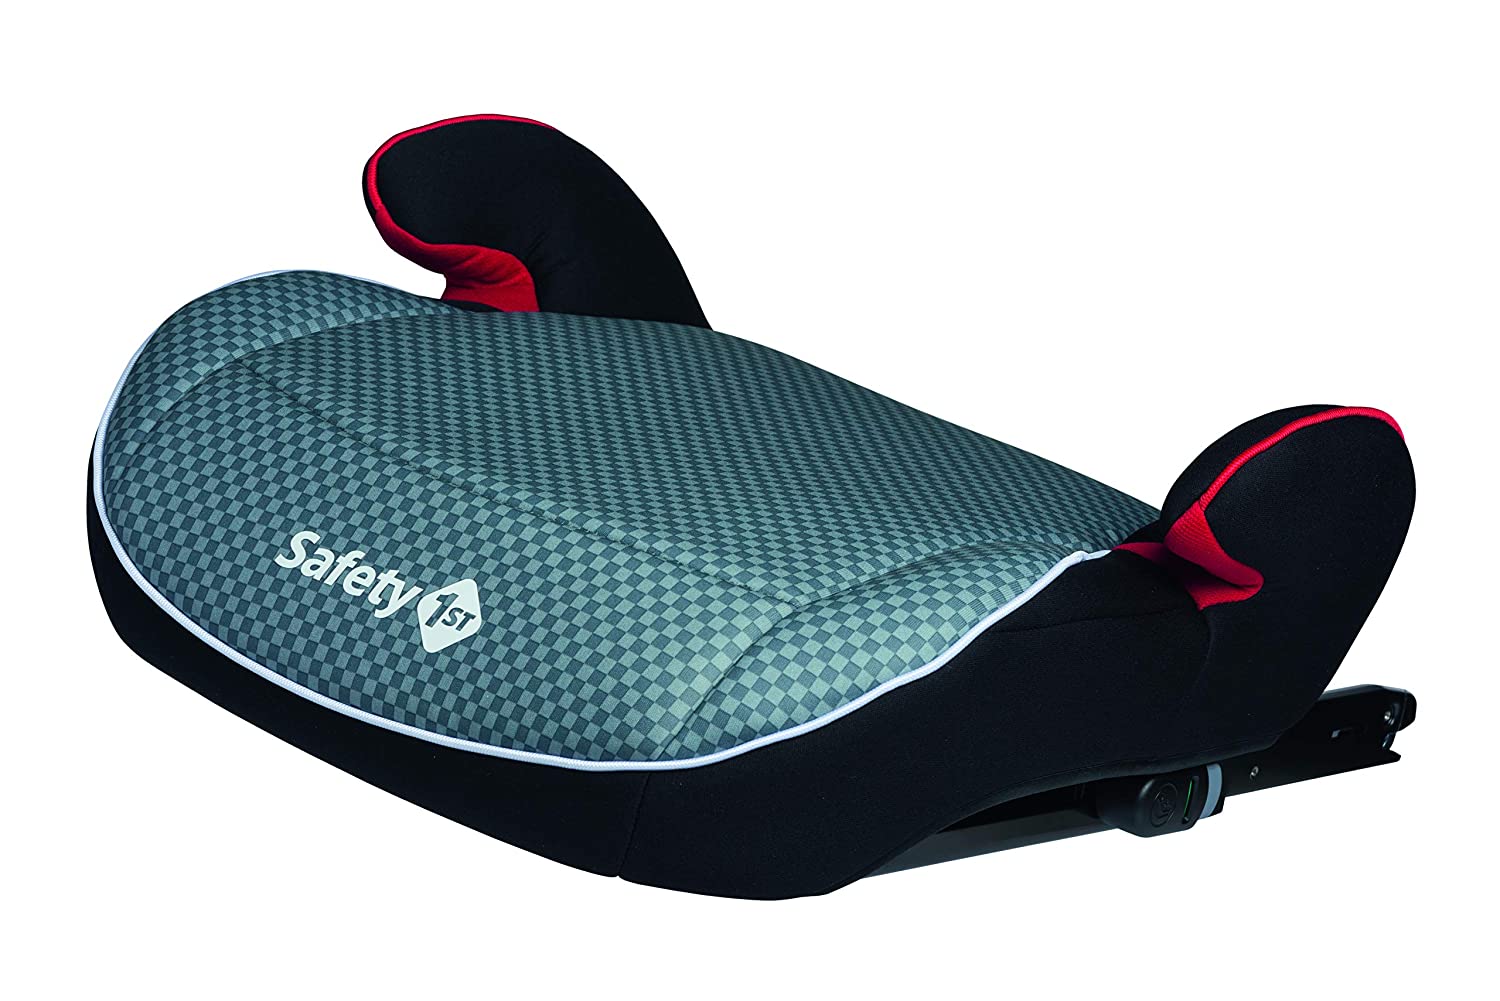 Safety 1st Manga or Manga Fix child seat, practical group 2/3 booster seat with or without ISOFIX connection (15-36 kg), suitable for children from approx. 3.5 to approx. 12 years